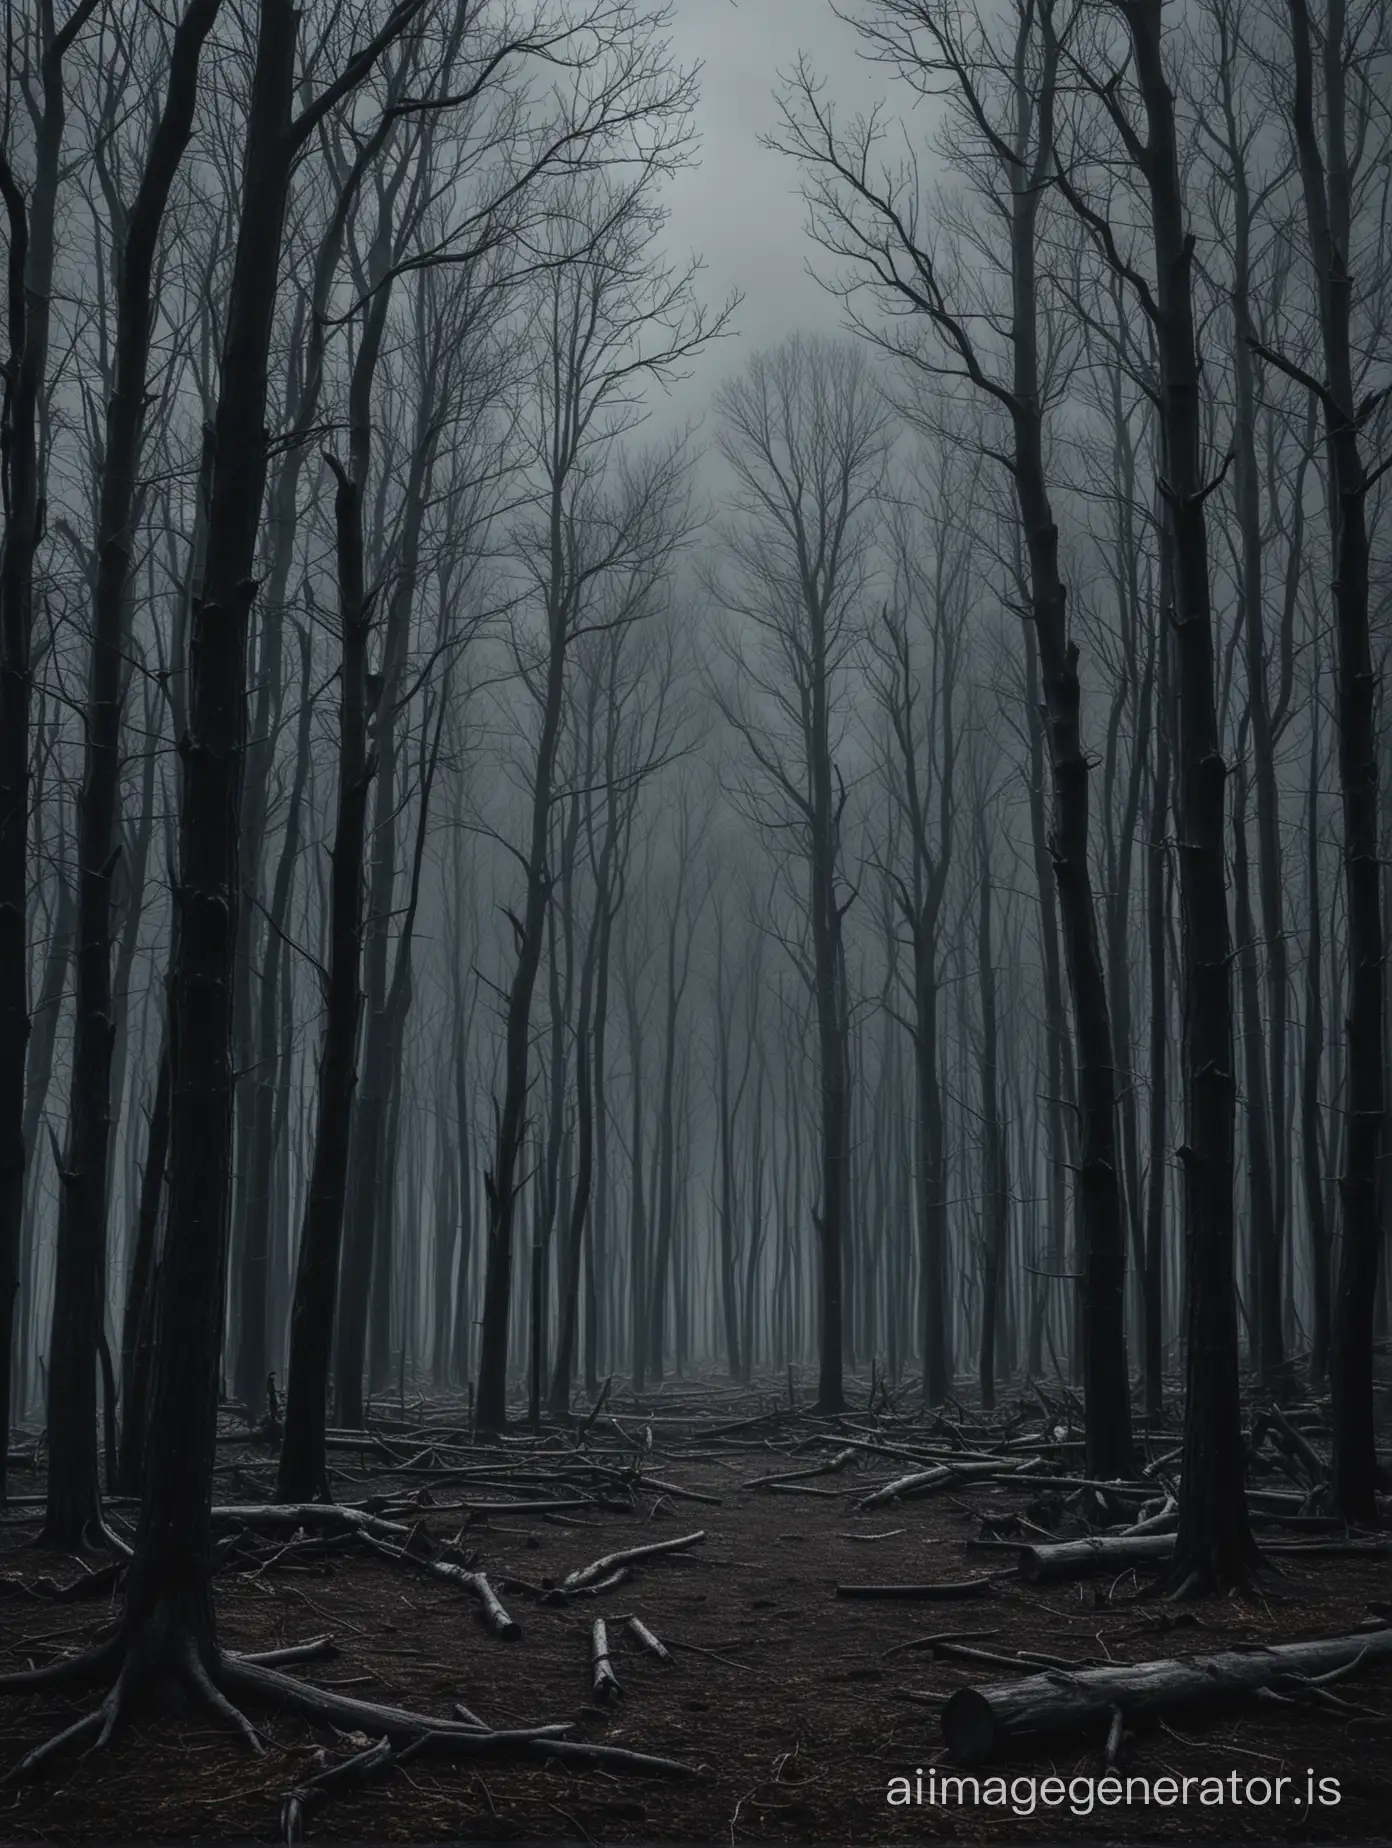 A dark picture, with a dark forest full of dead trees